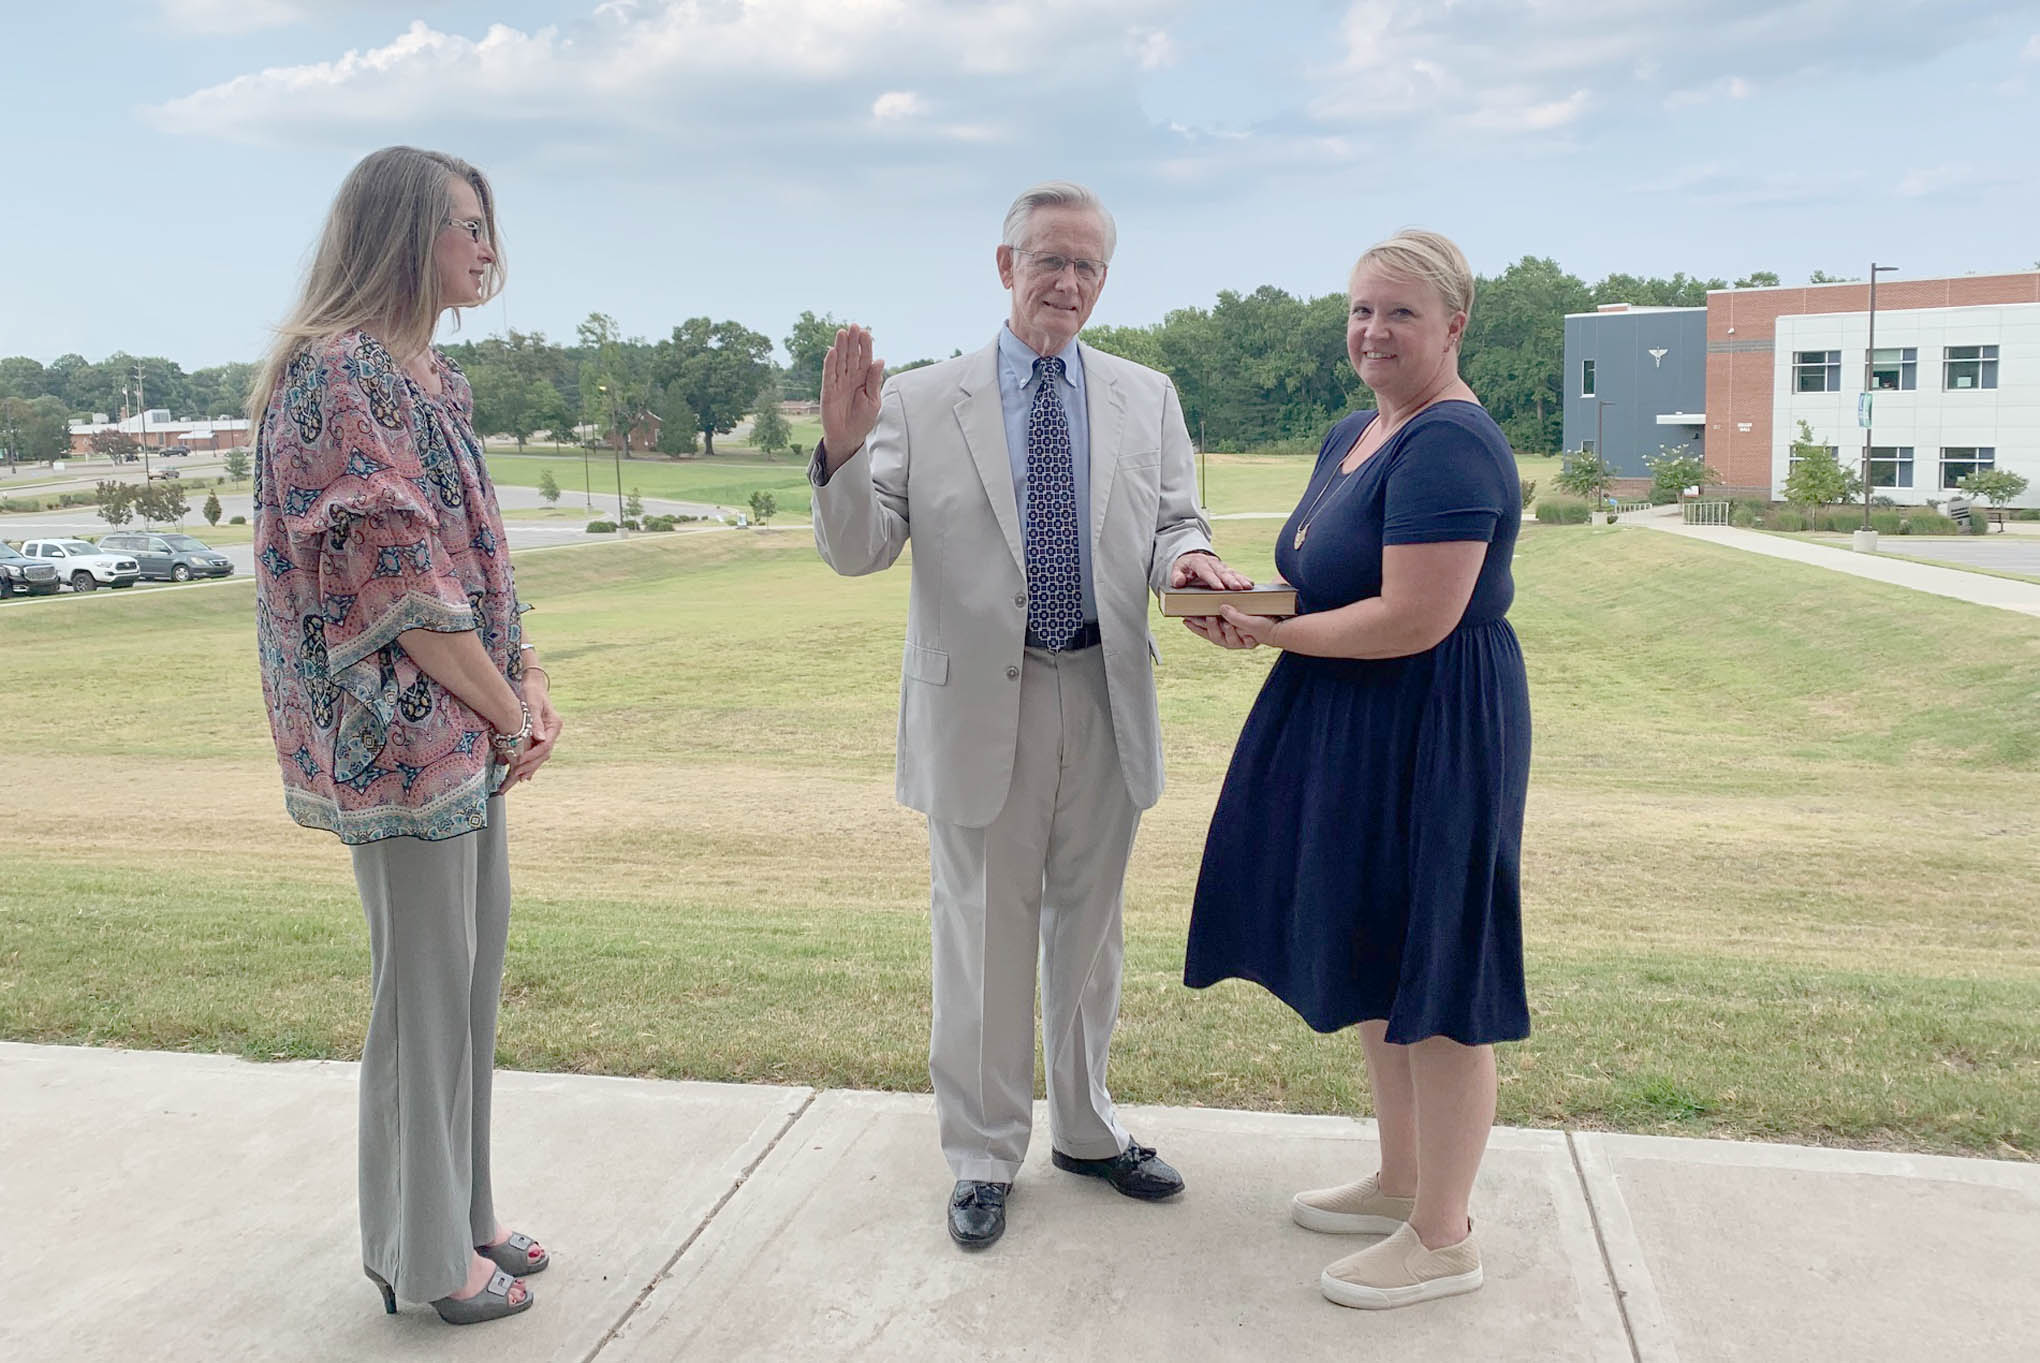 Click to enlarge,  William "Bill" E. Carver Jr. (center) has been sworn in as the newest member of the Central Carolina Community College Board of Trustees. Holding the Bible for Mr. Carver is his daughter-in-law, Rachel Carver (center). Susie K. Thomas (left), Clerk of Superior Court in Lee County, conducted the ceremony.  